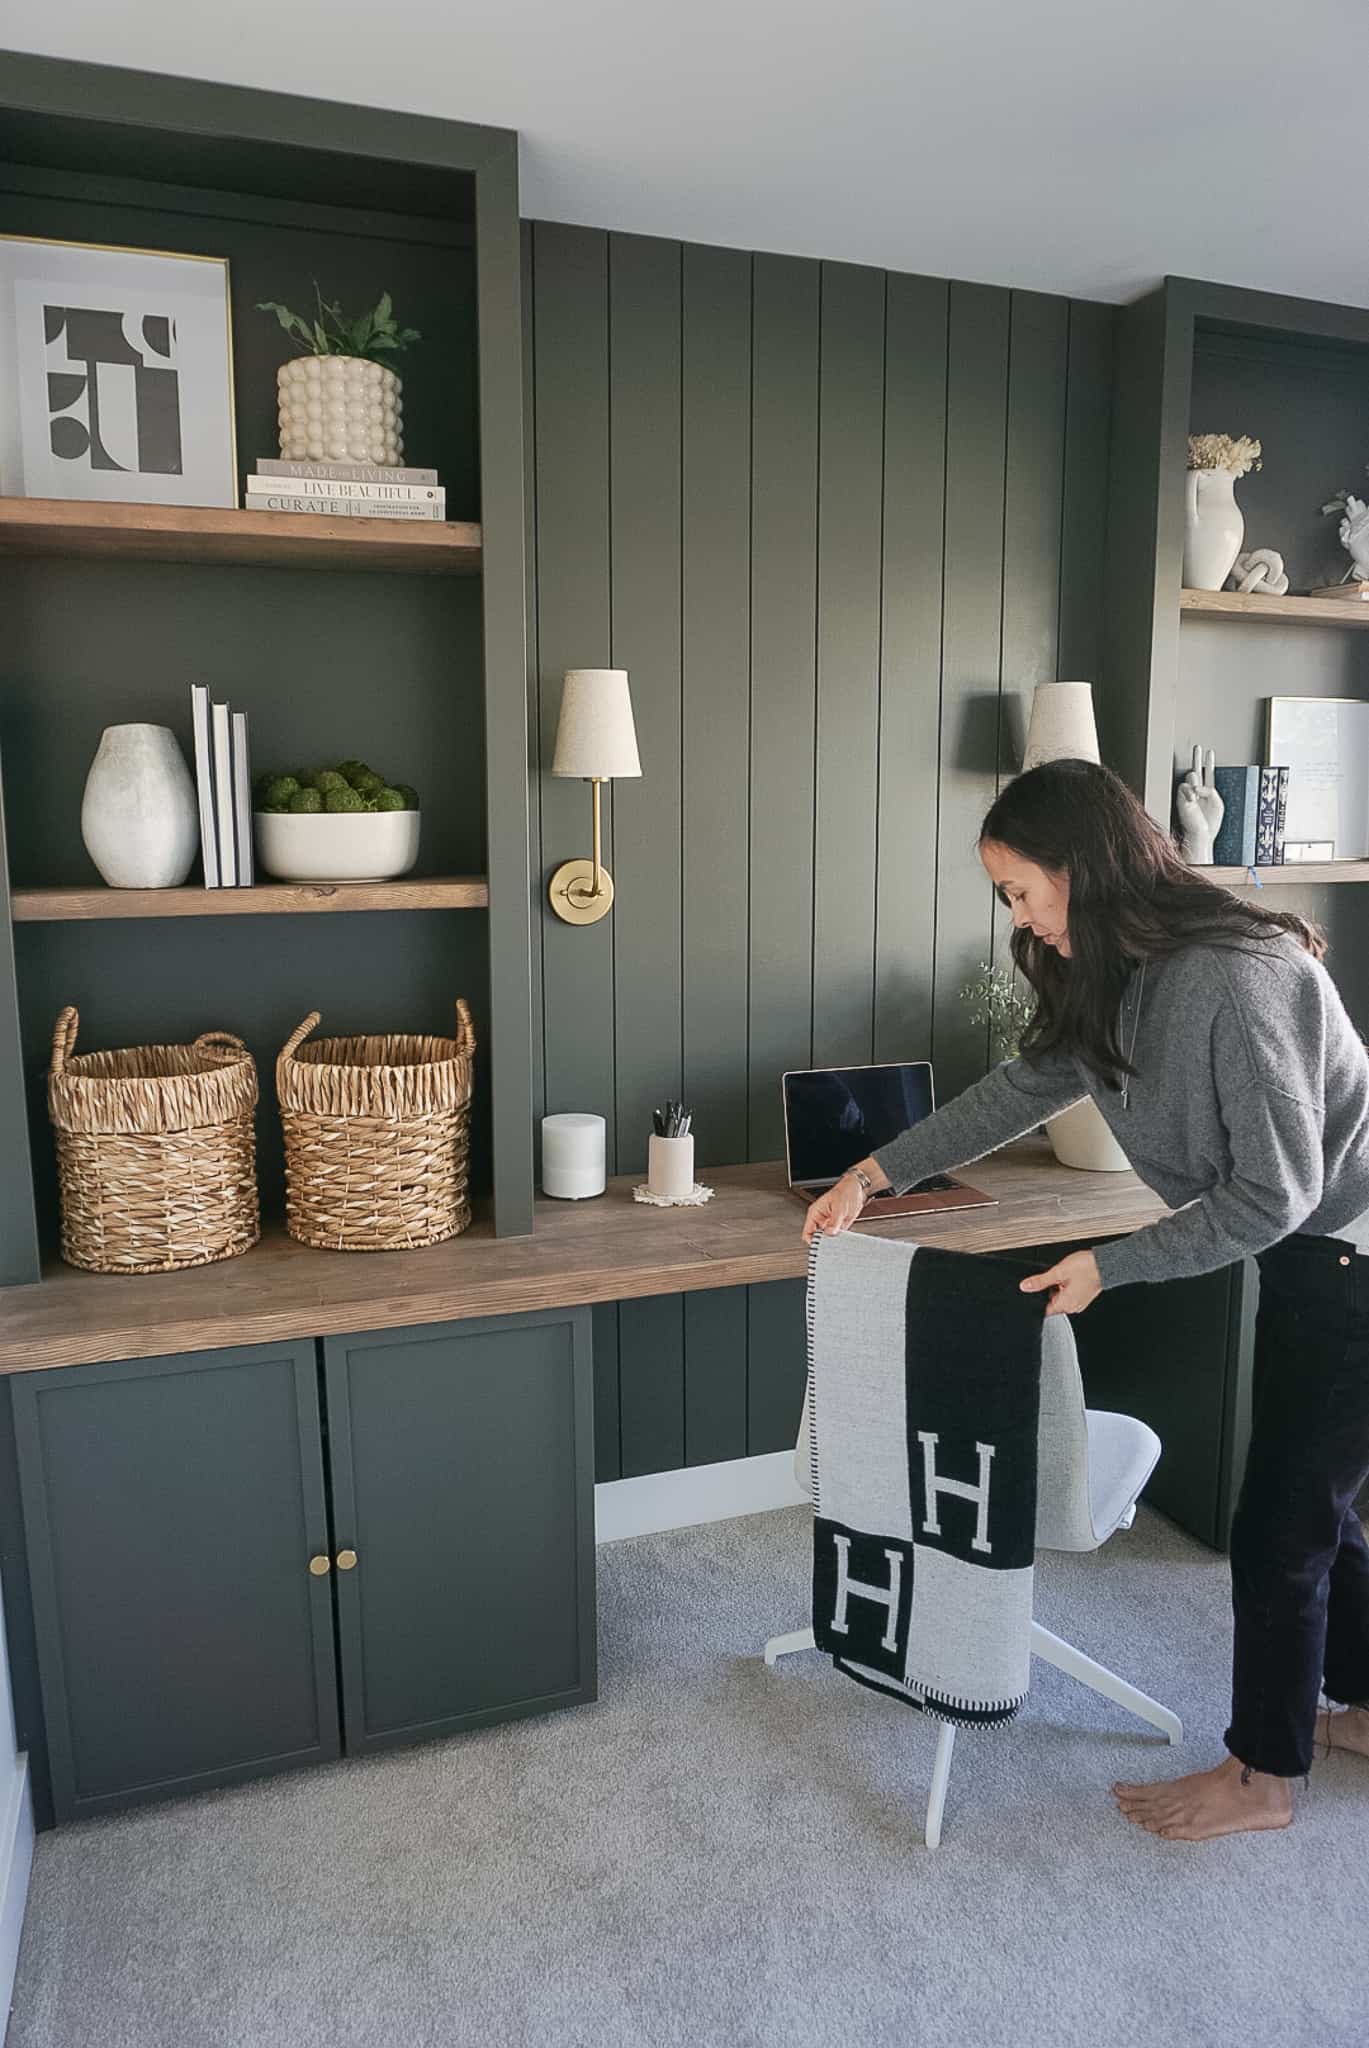 built in home office set up in a deep mossy green with shiplap and lighting at the back, bookshelves on either side and neutral decor throughout. Signed Samantha is standing fixing the blanket on the office chair.